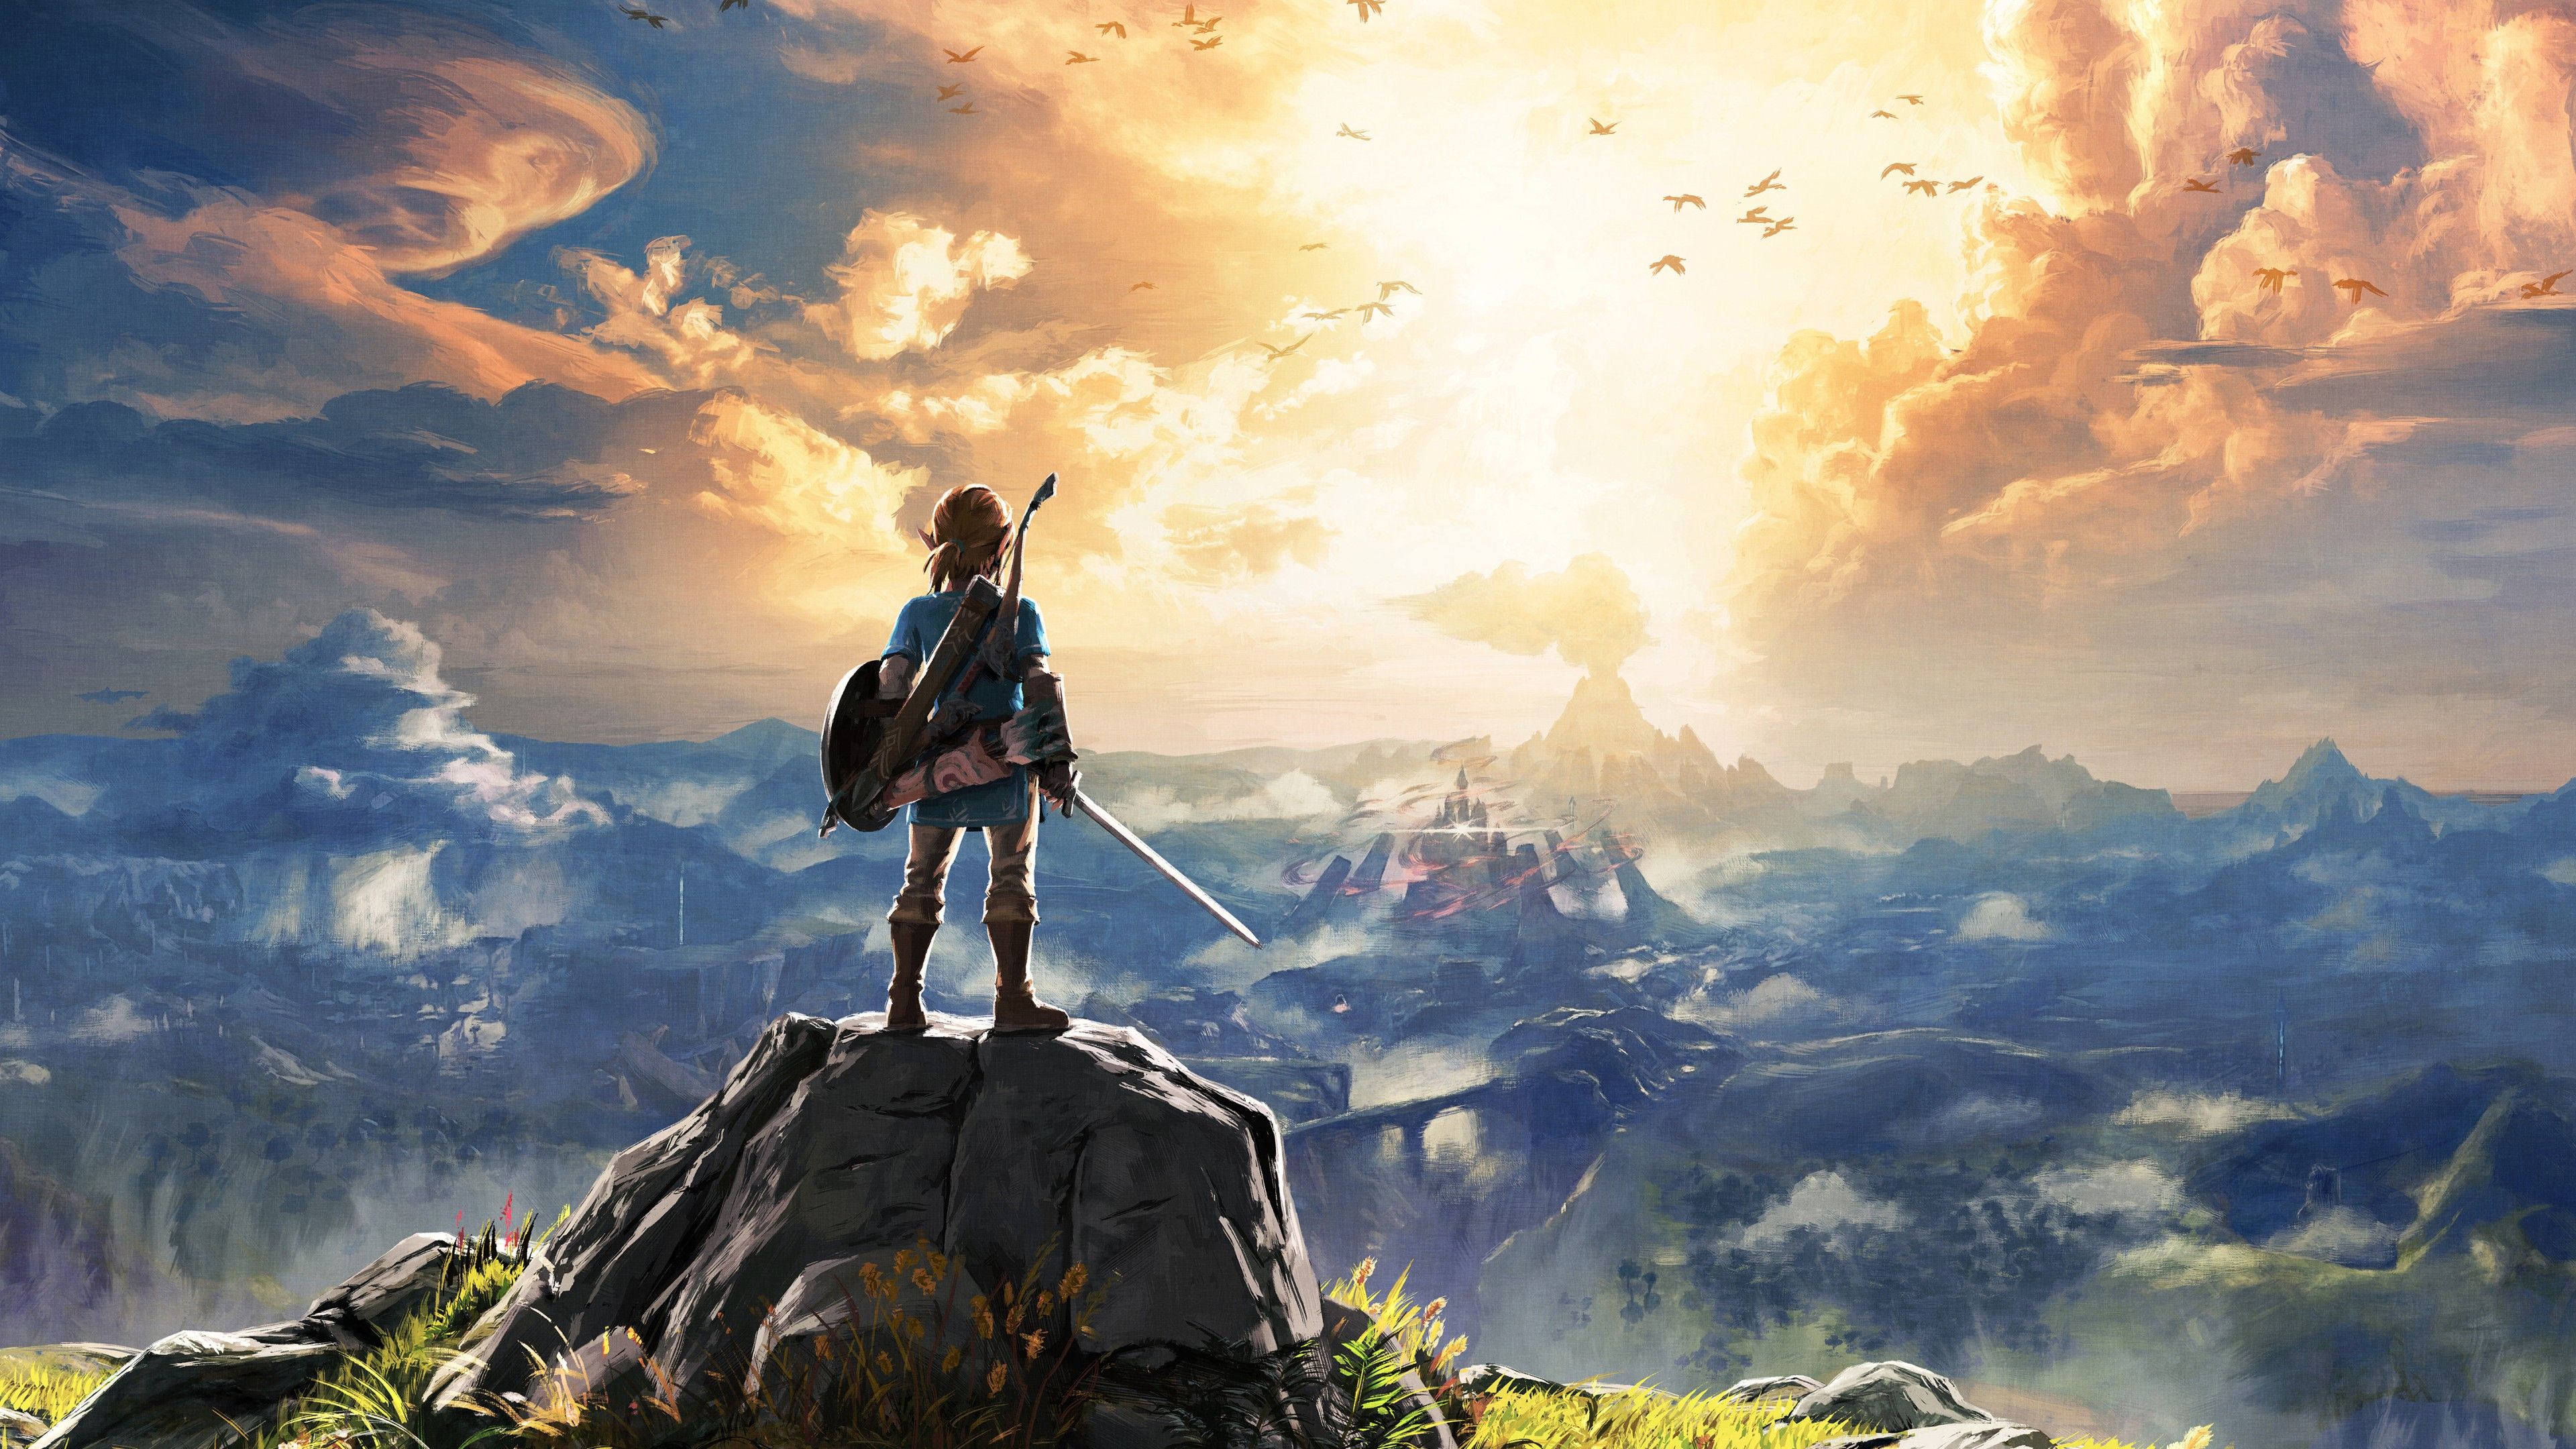 Zelda 4K wallpapers for your desktop or mobile screen free and easy to